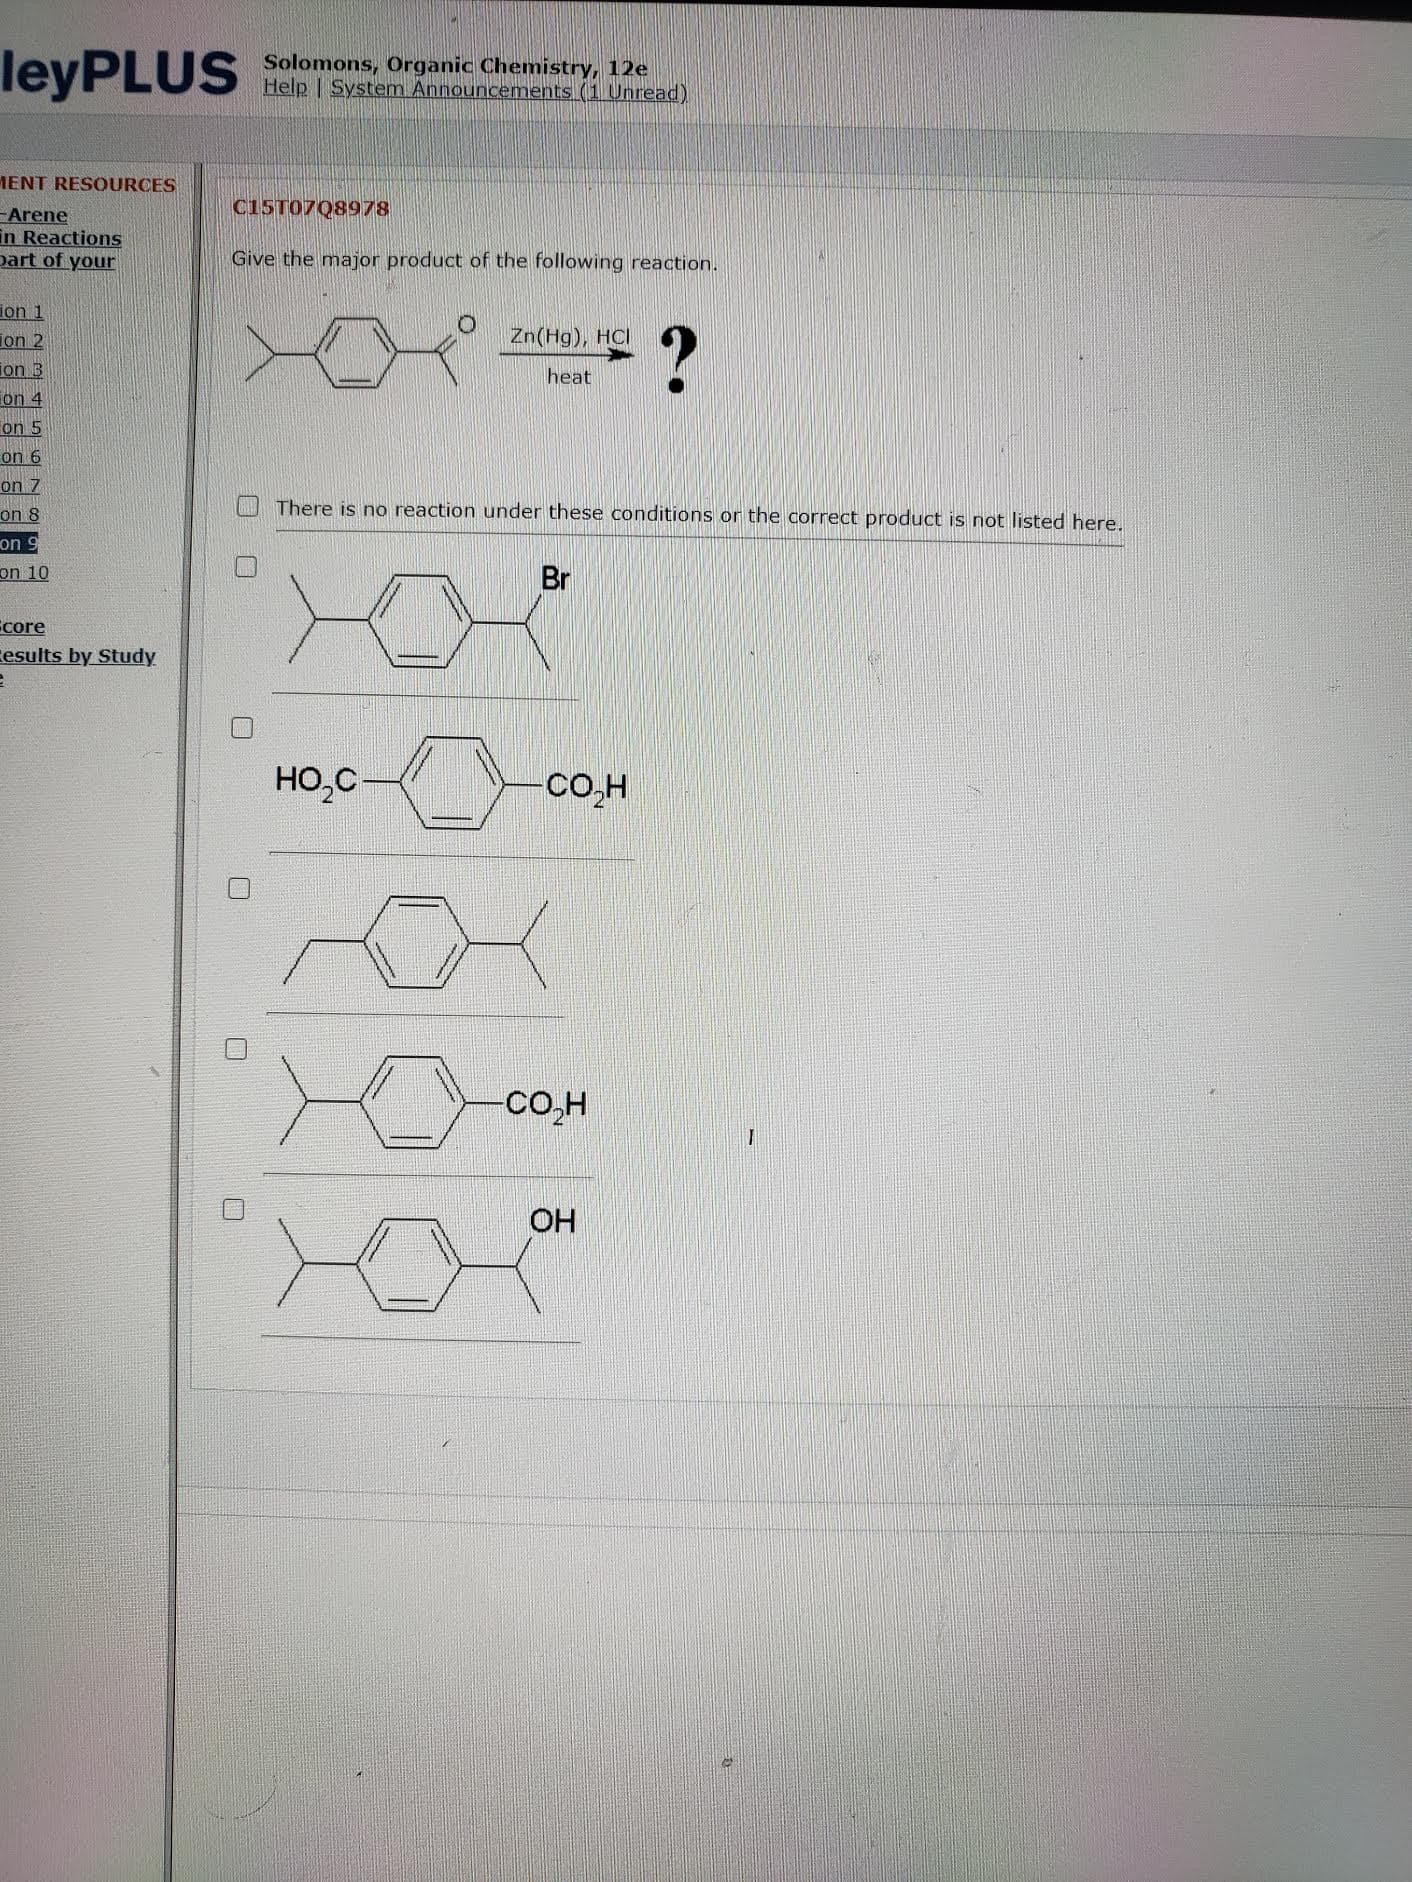 Give the major product of the following reaction.
Zn(Hg), HCI
heat
H There is no reaction under these conditions or the correct product is not listed here.
Br
HO,C
Co,H
Co,H
OH
